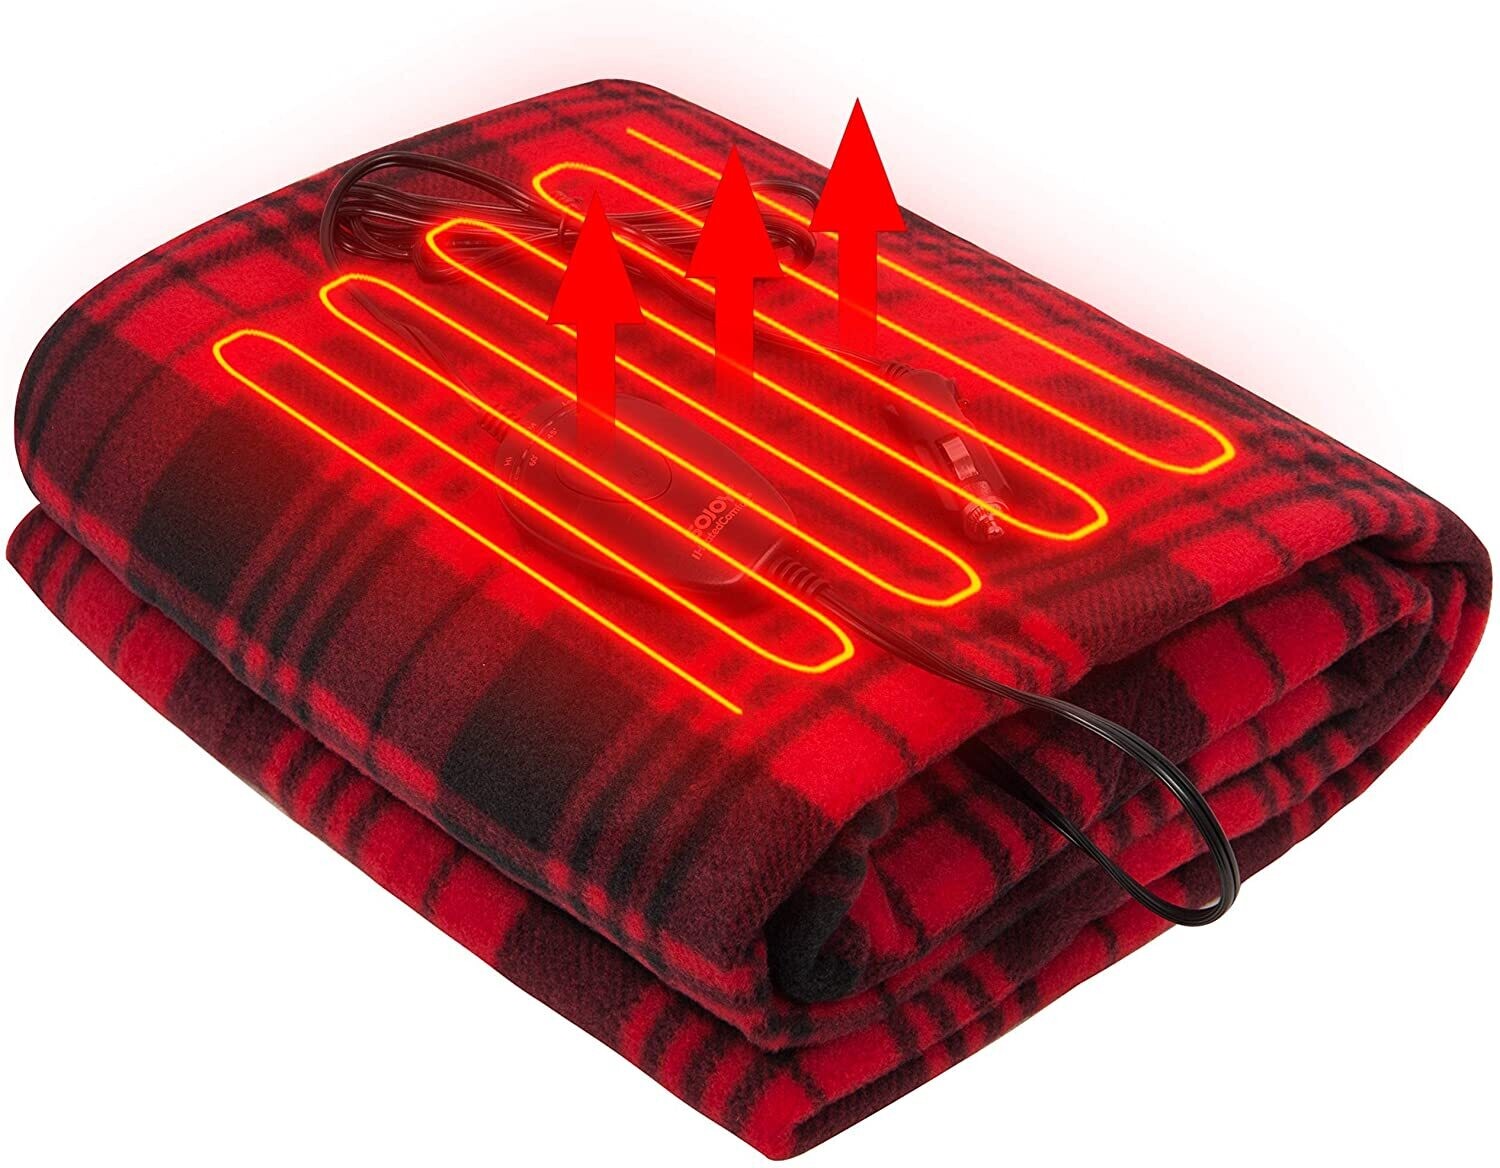 DC12V Car Heated Blanket with Intelligent Temp and 30/45/60mins Auto-Off Timer Controller for Road Trip Outdoor Camping(60"x 40")(Black and Red)